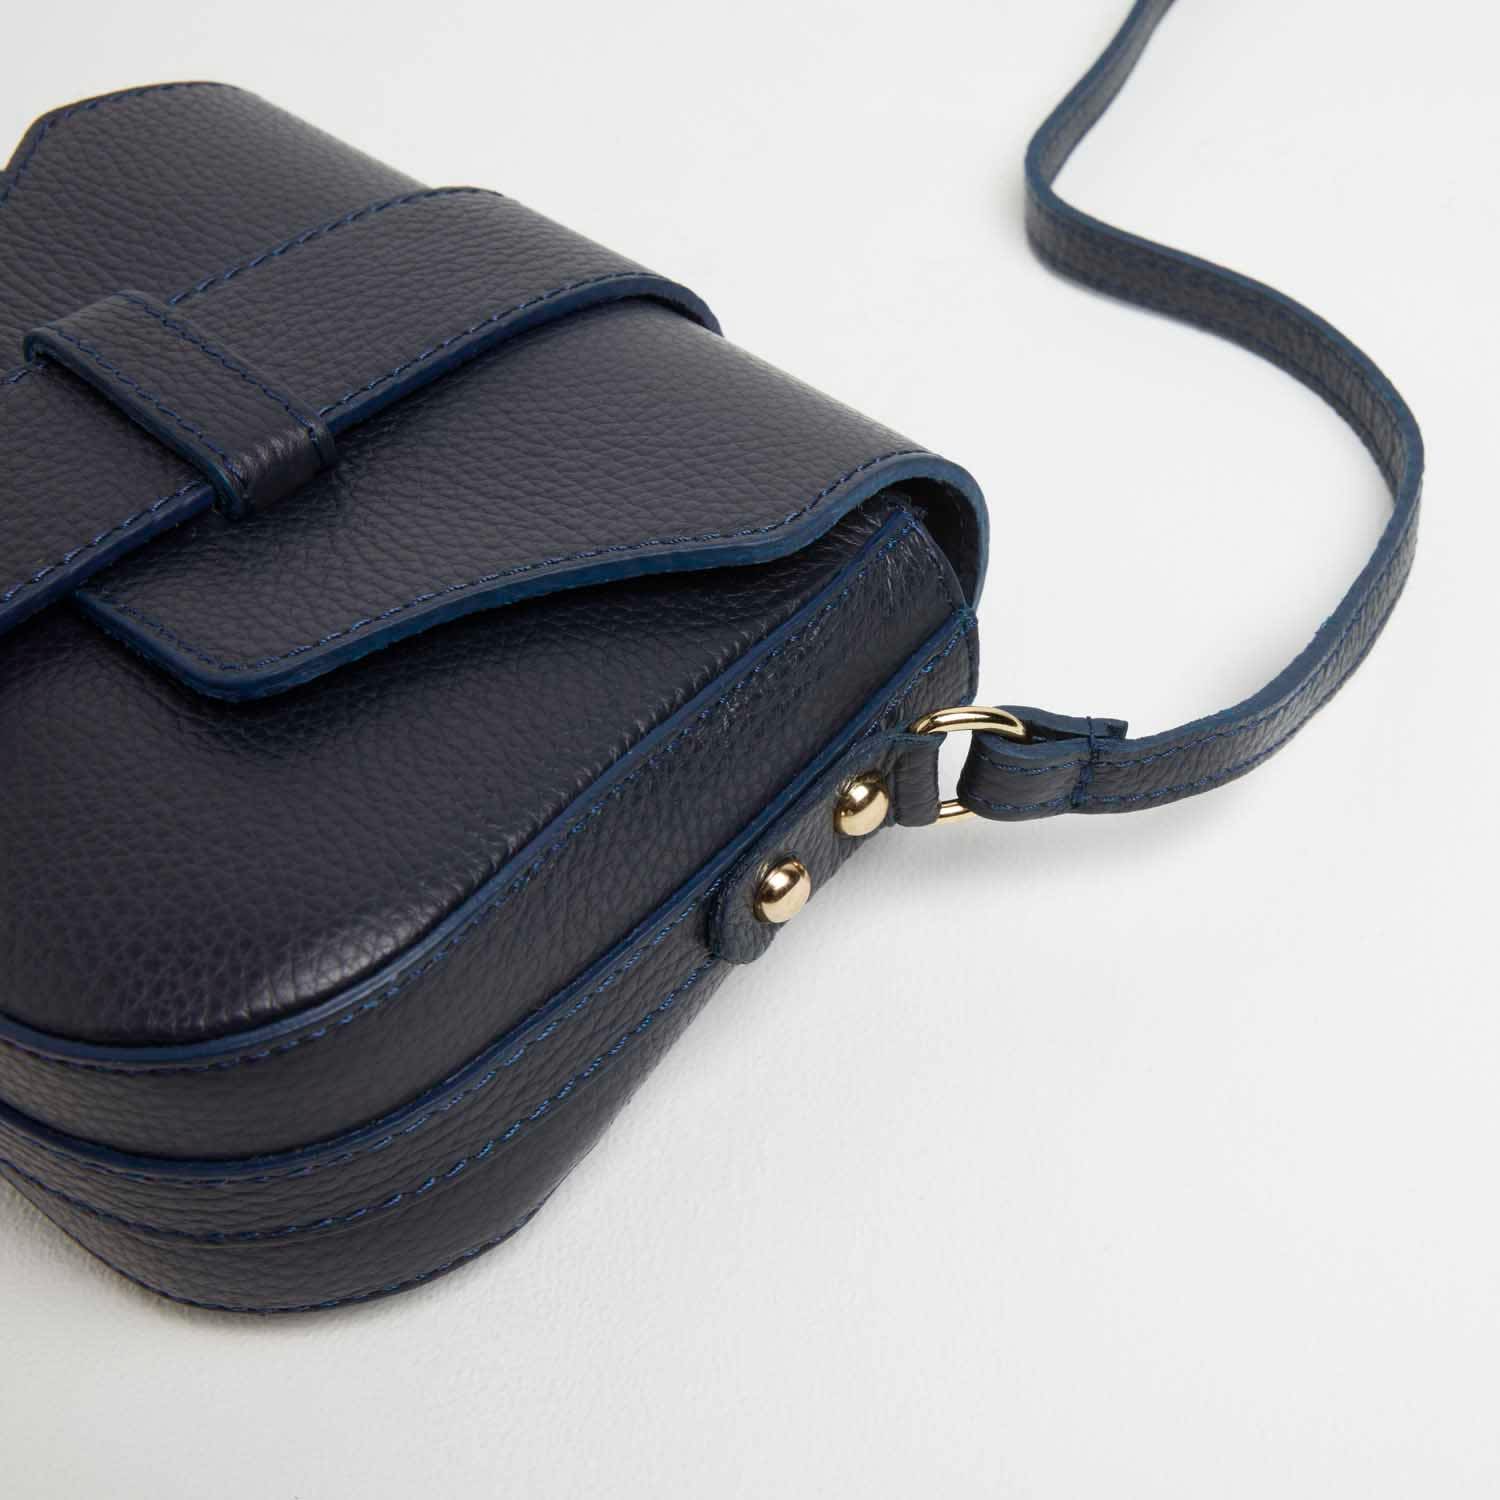 Crossbody Bag In Navy With Interchangeable Straps by B & Floss